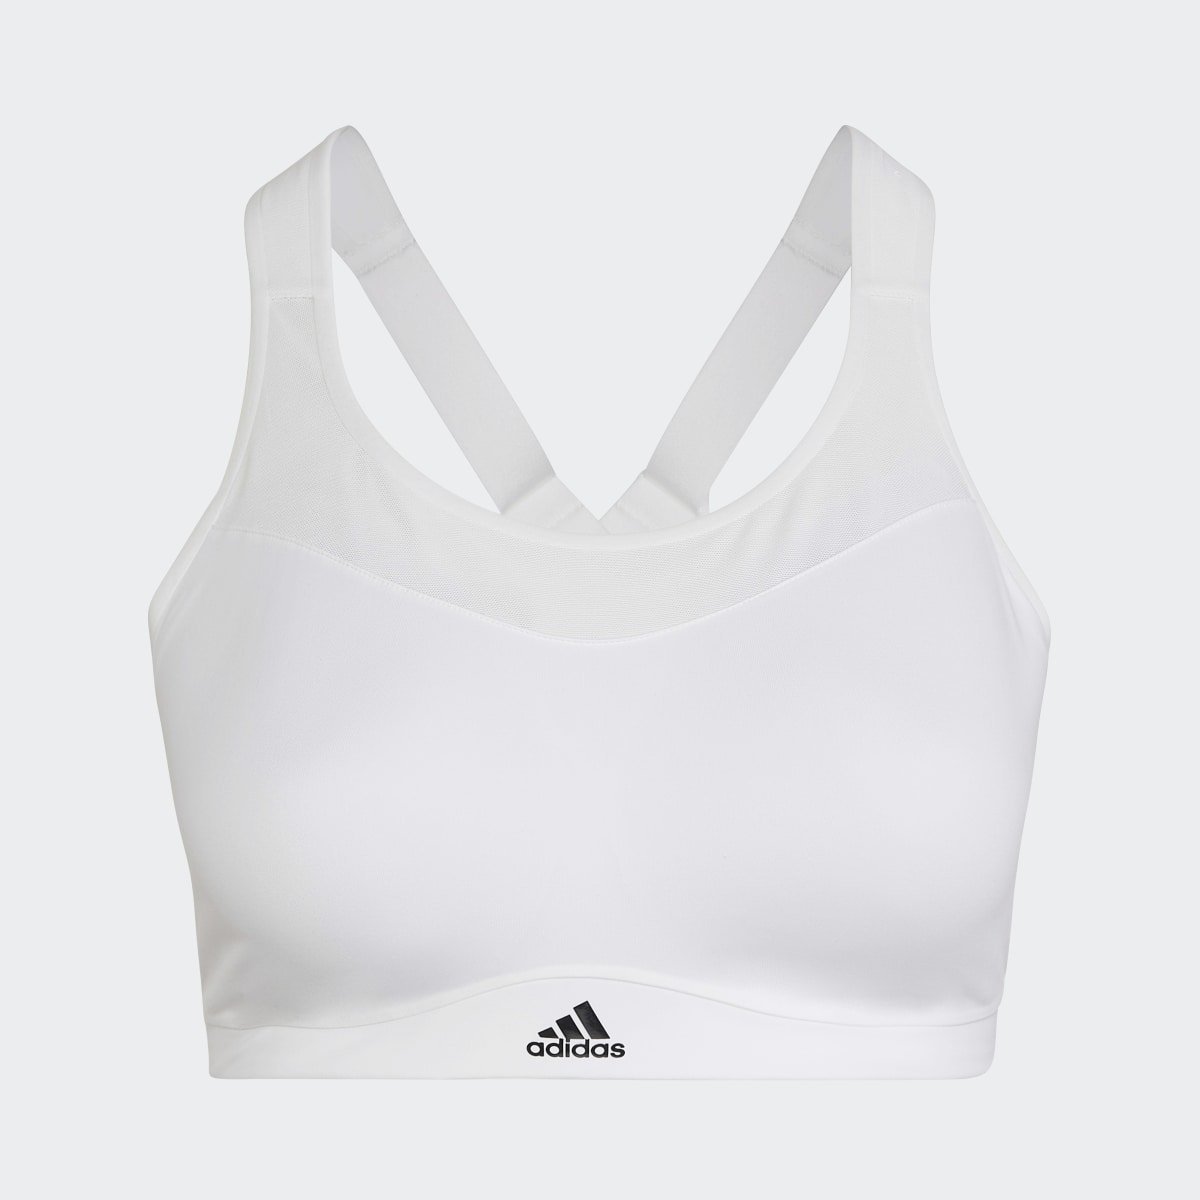 Adidas Brassière de training Maintien fort adidas TLRD Impact (Grandes tailles). 5